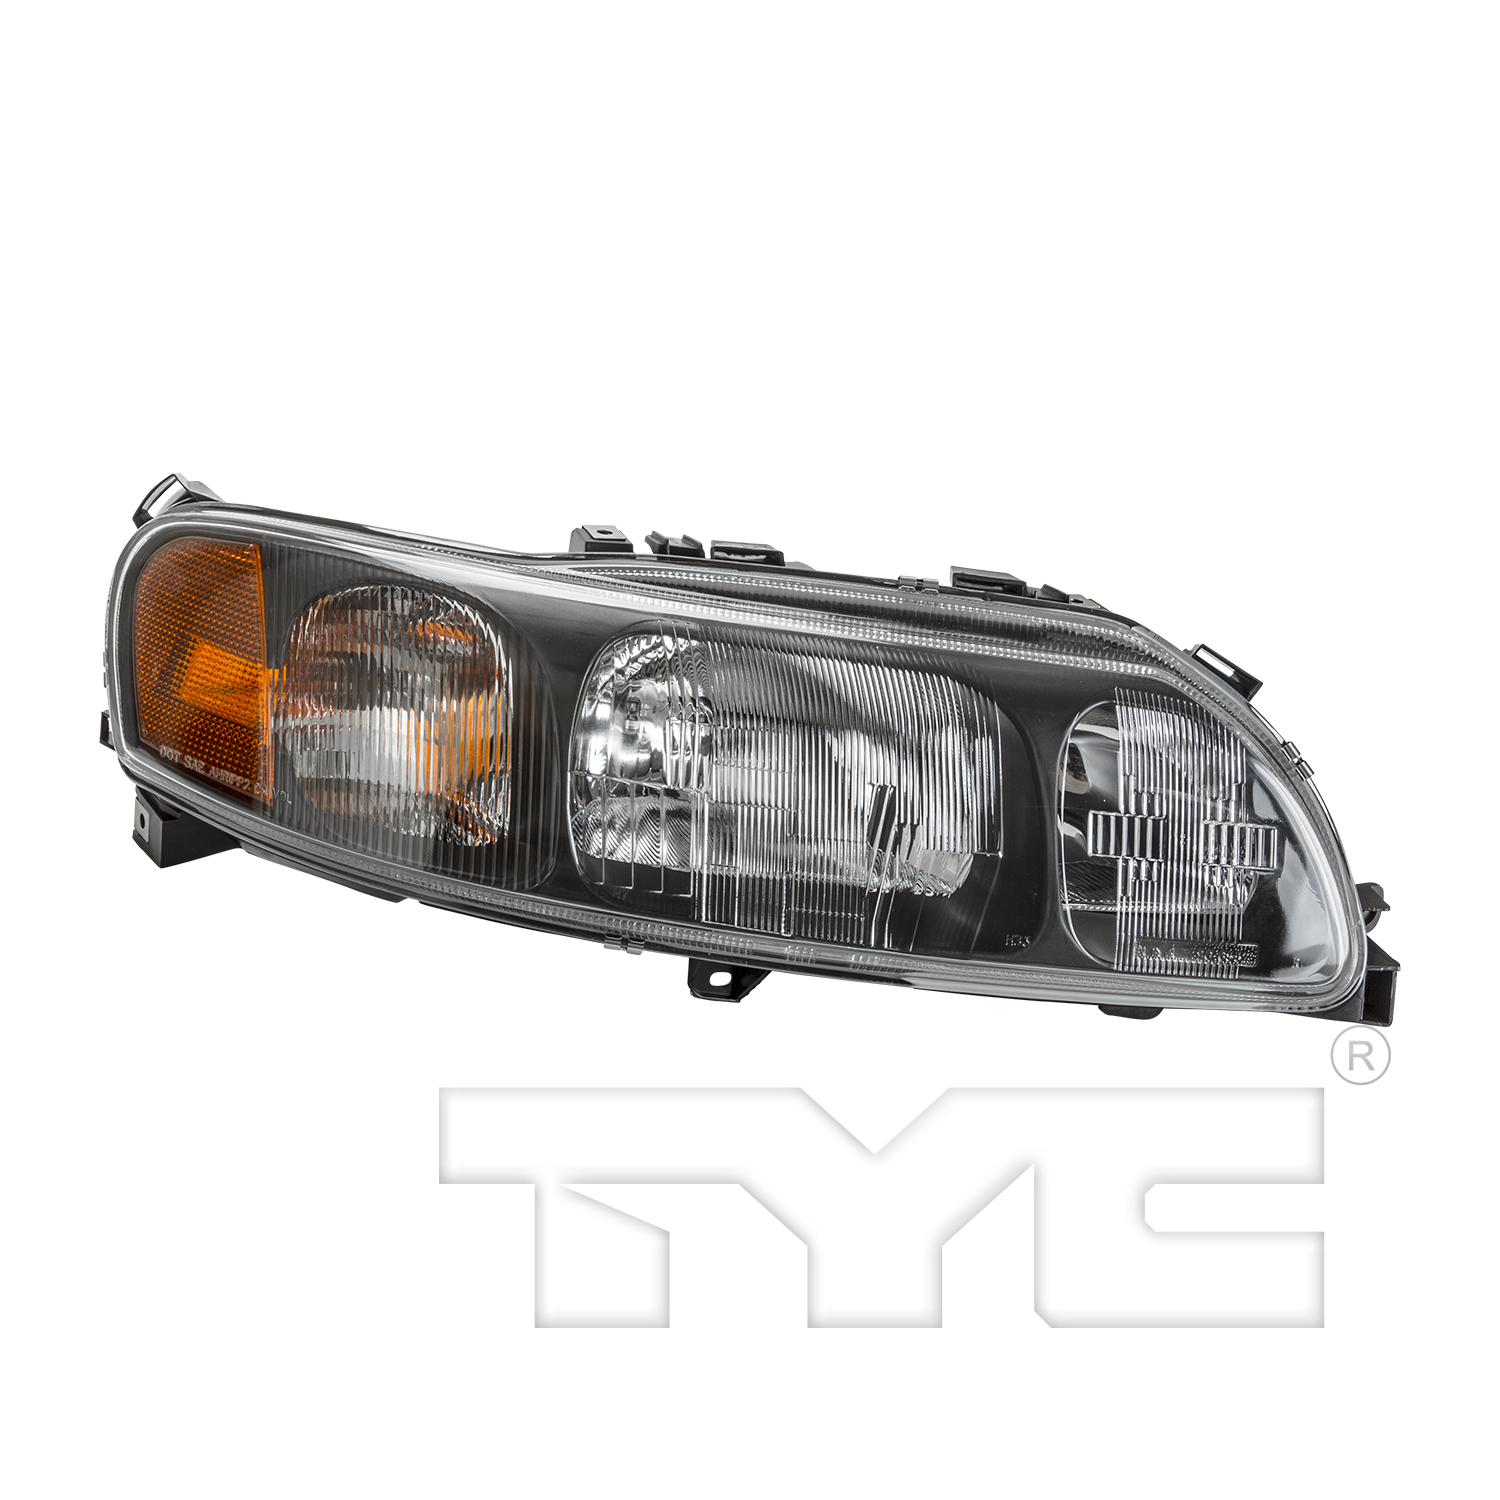 Aftermarket HEADLIGHTS for VOLVO - S60, S60,01-04,RT Headlamp assy composite